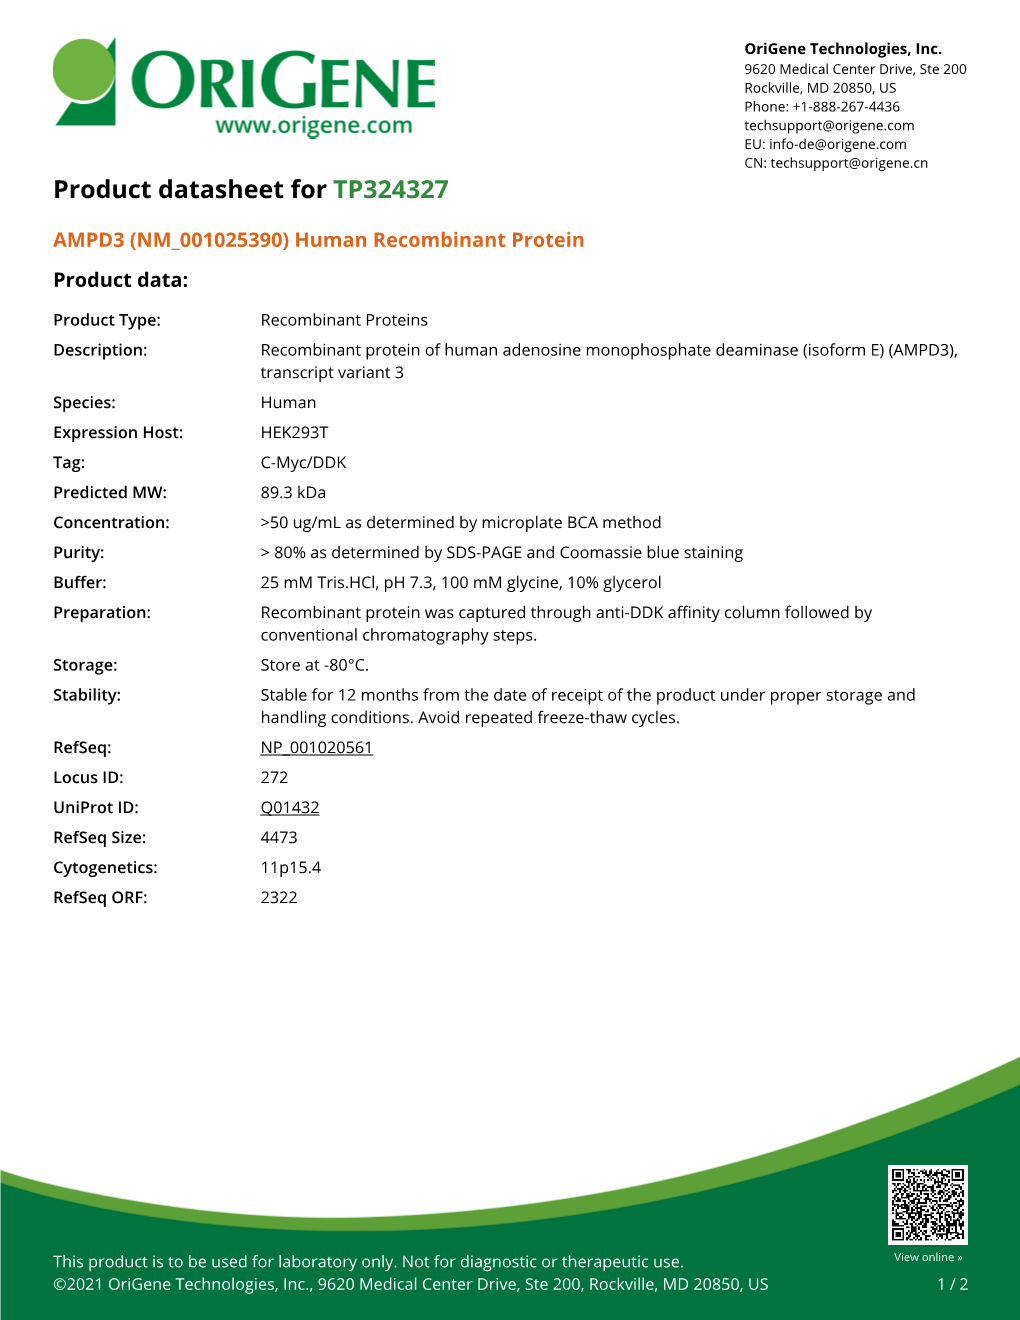 AMPD3 (NM 001025390) Human Recombinant Protein Product Data